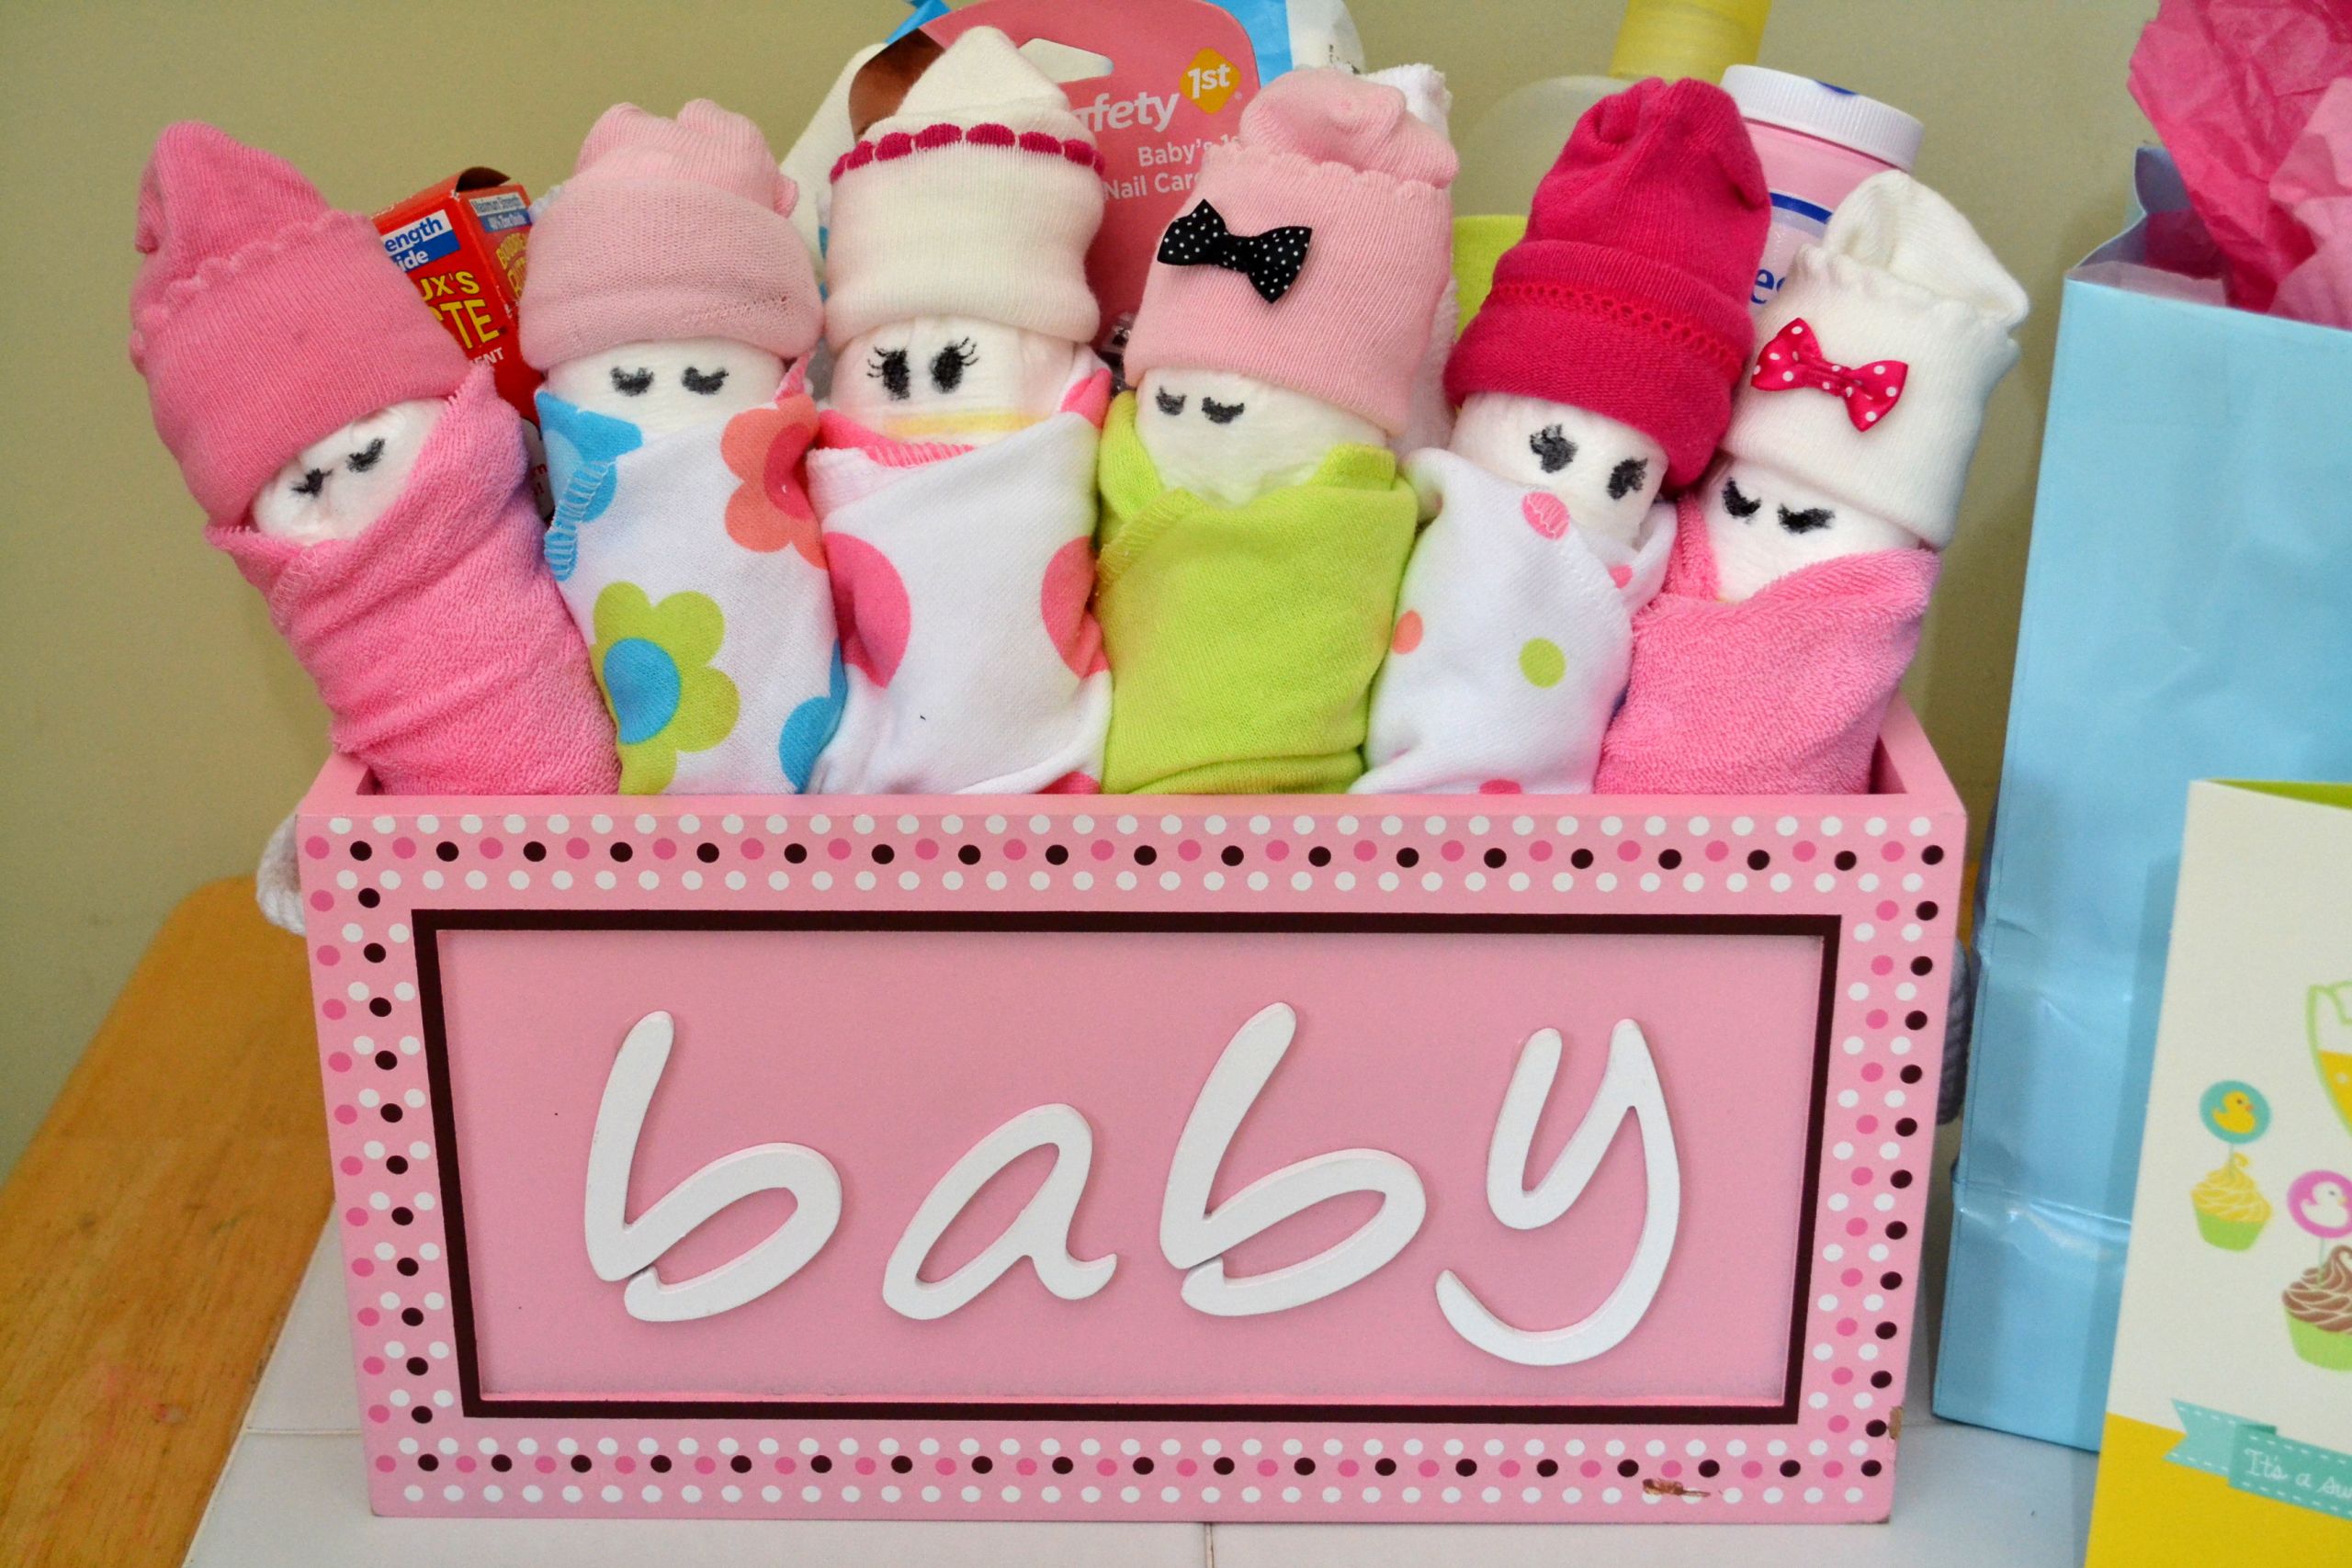 DIY Baby Gifts Ideas
 Essential Baby Shower Gifts & DIY Diaper Babies